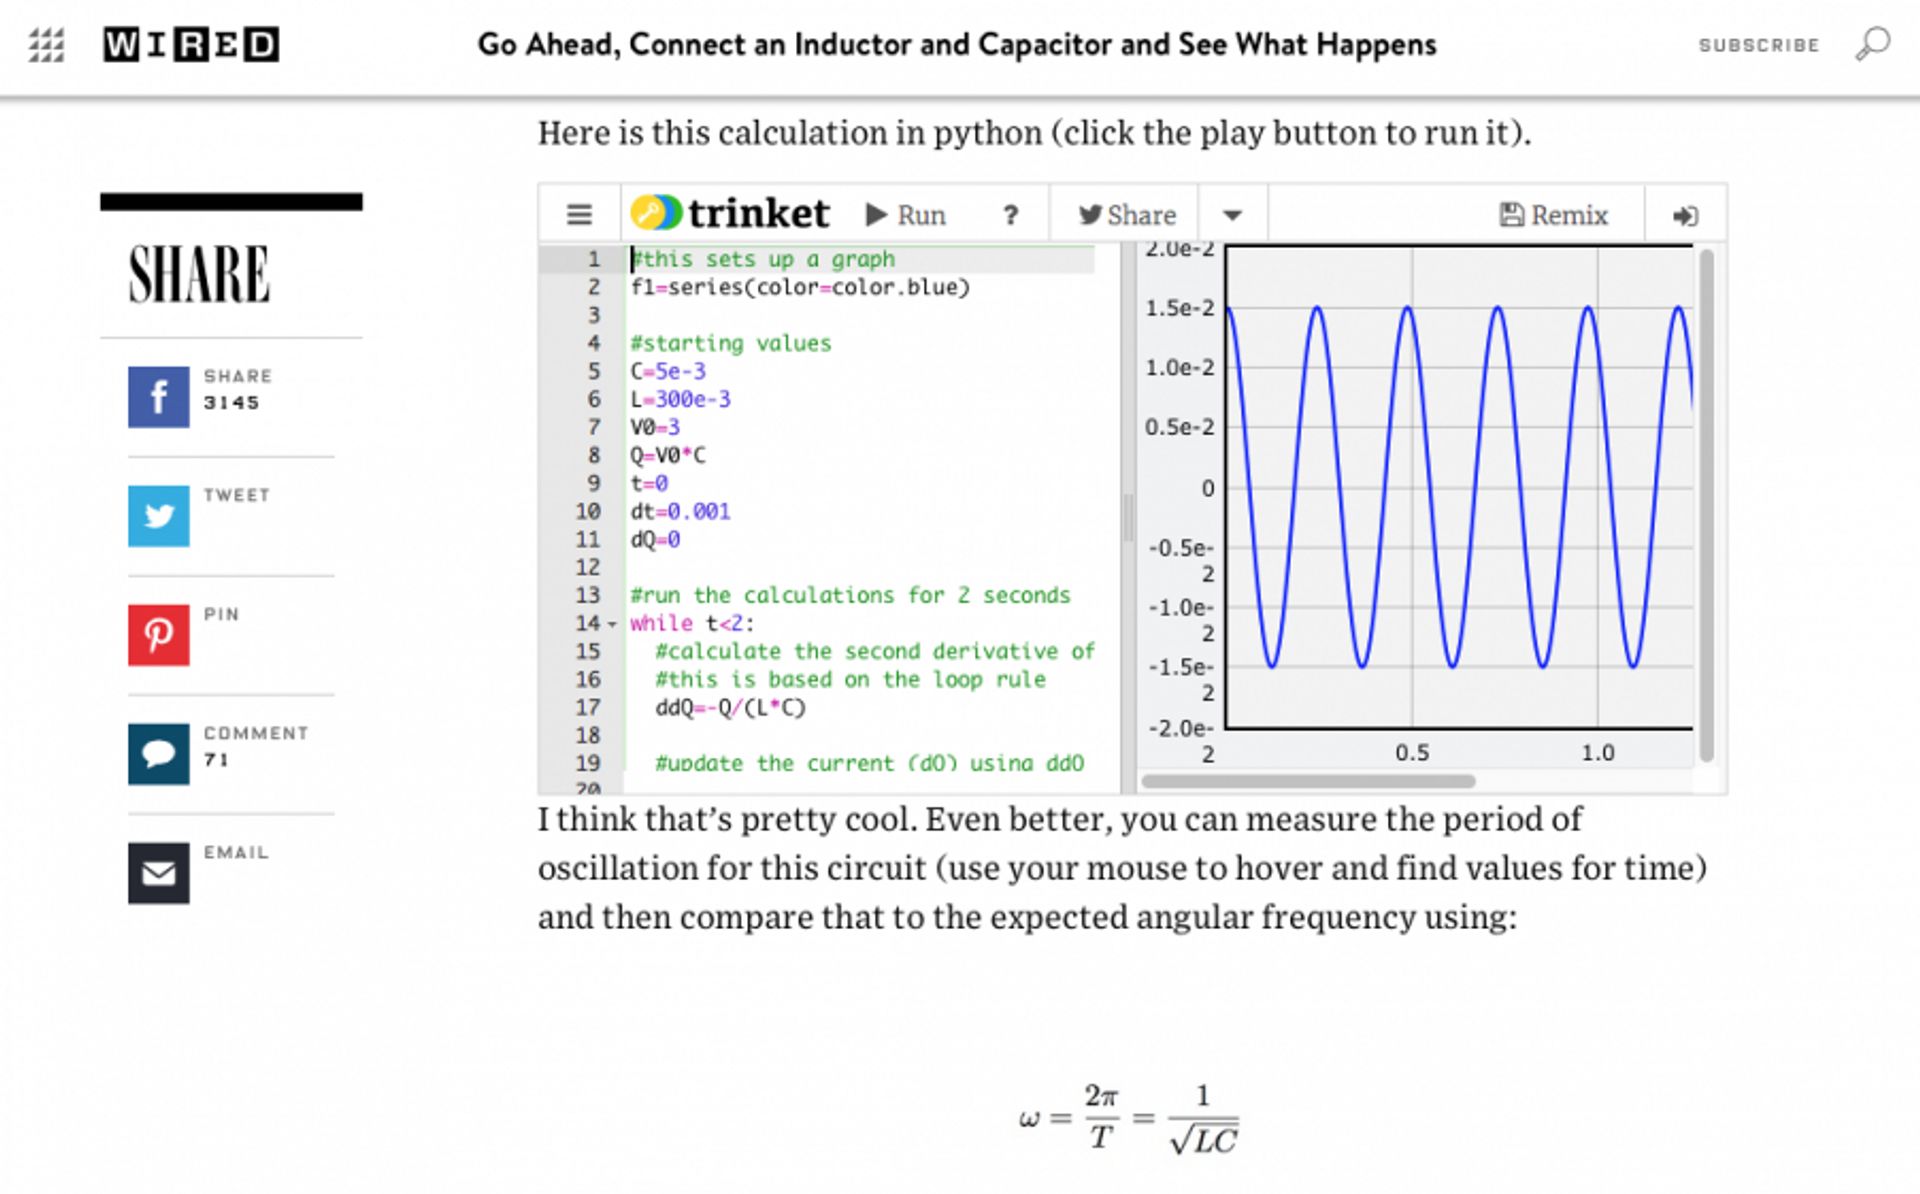 Screenshot of Wired article showing a python calculation.